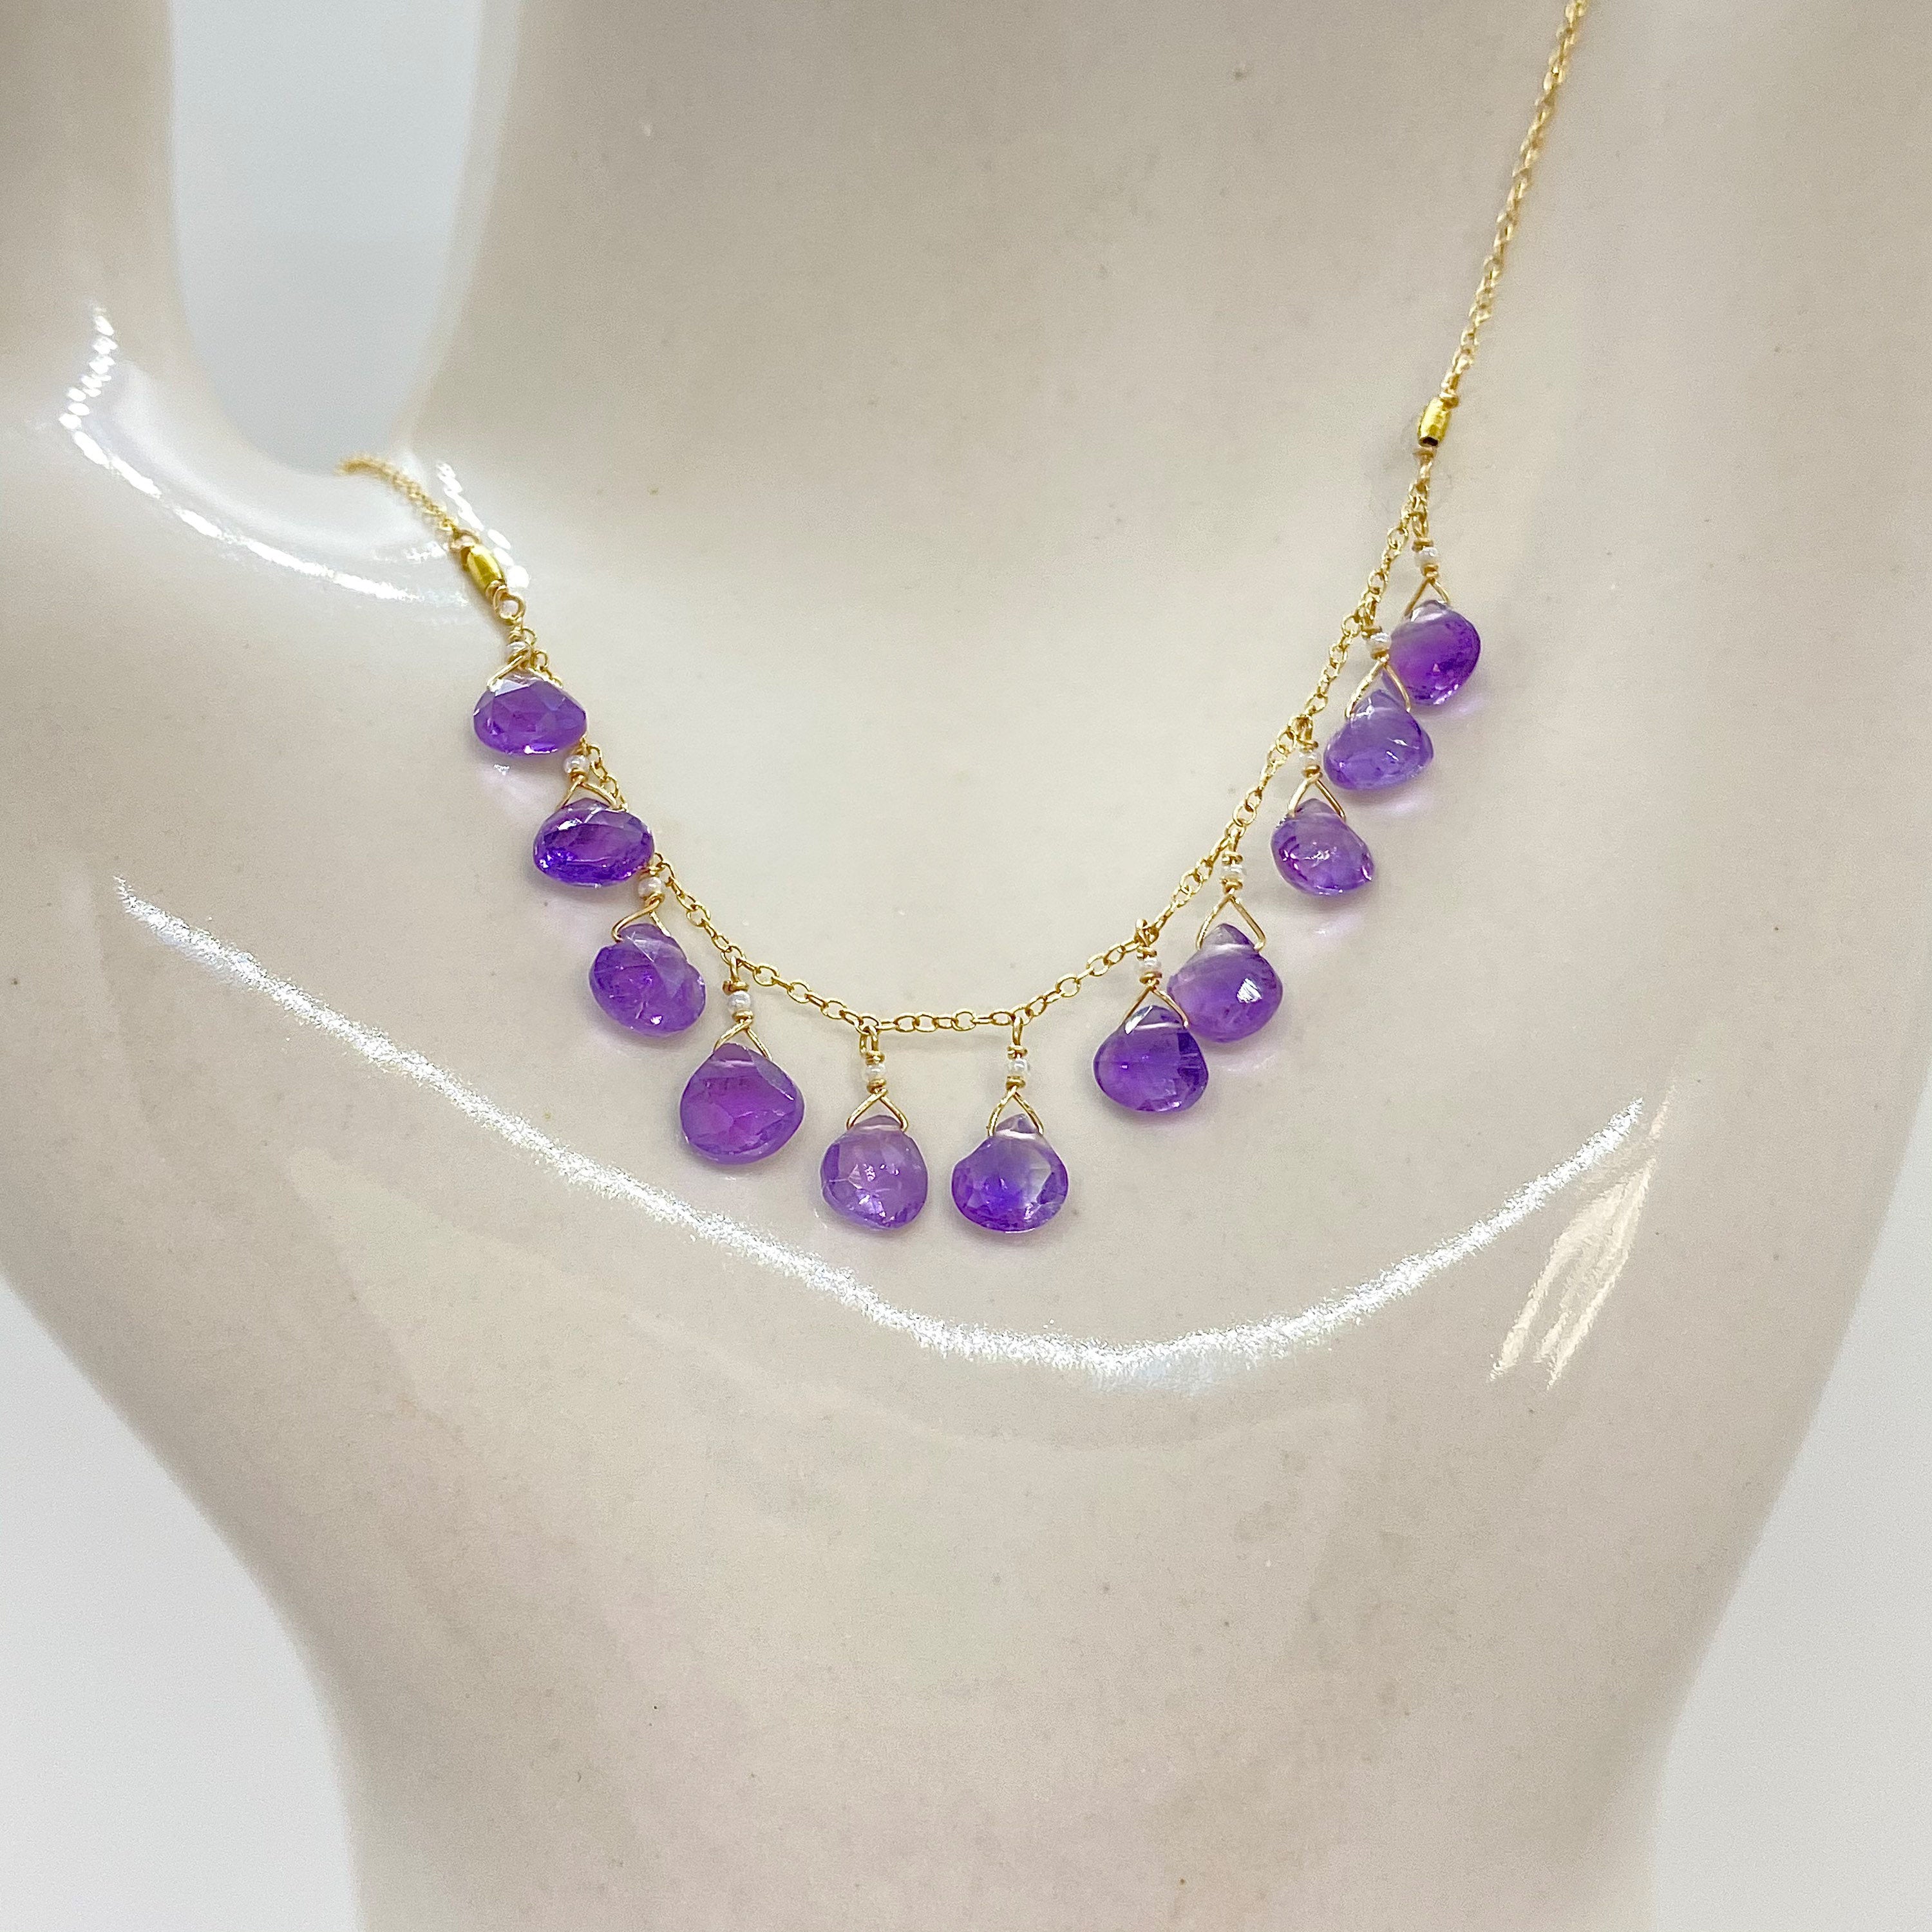 14k Yellow Gold Chain Necklace w/ Amethyst & Antique Italian Beads